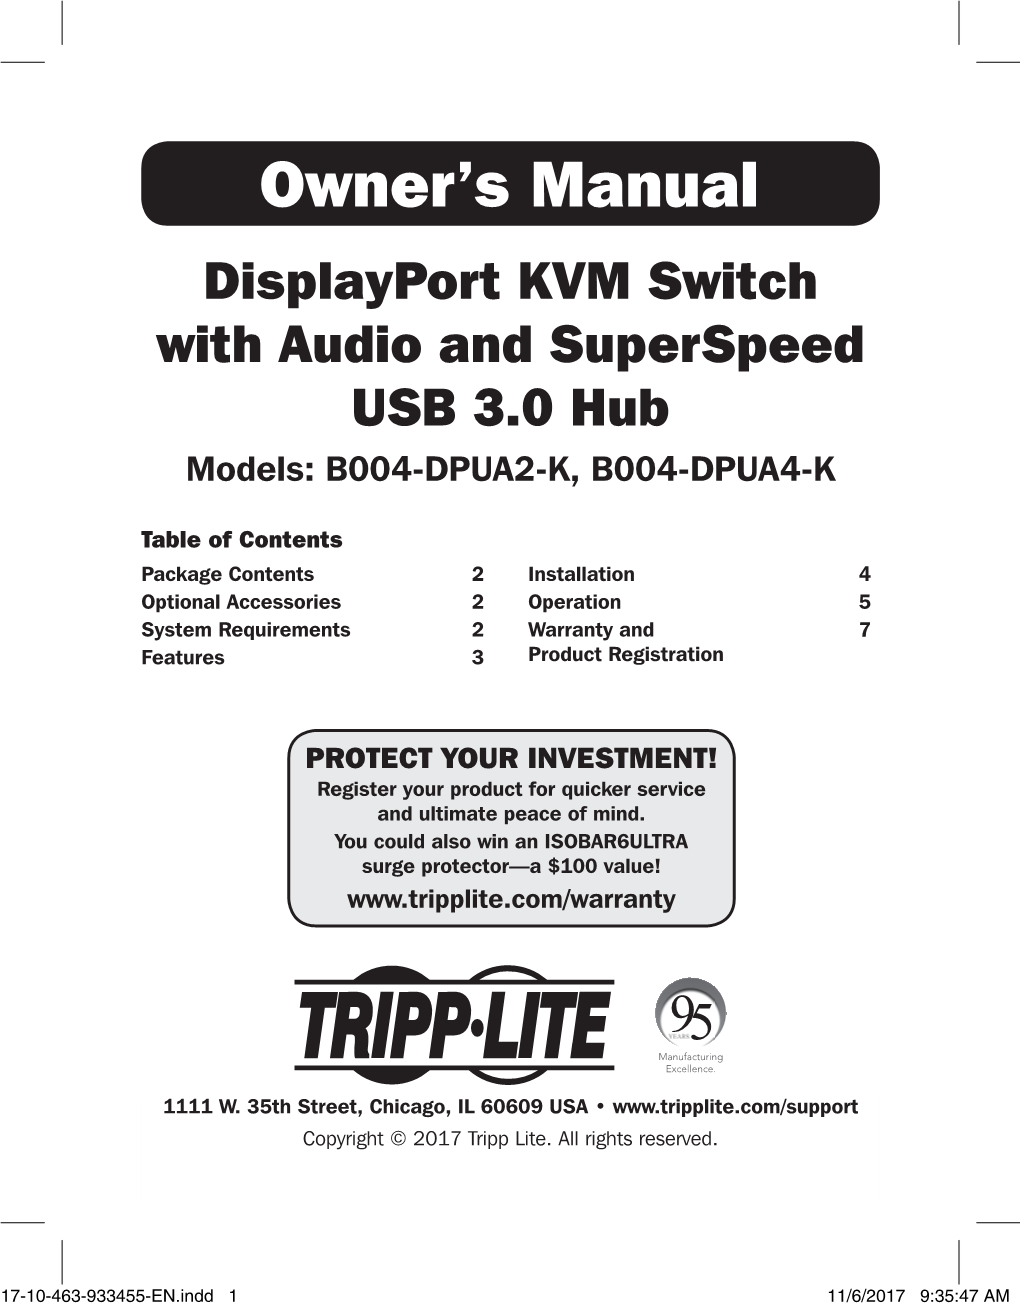 Owner's Manual for Displayport KVM Switch with Audio and Superspeed